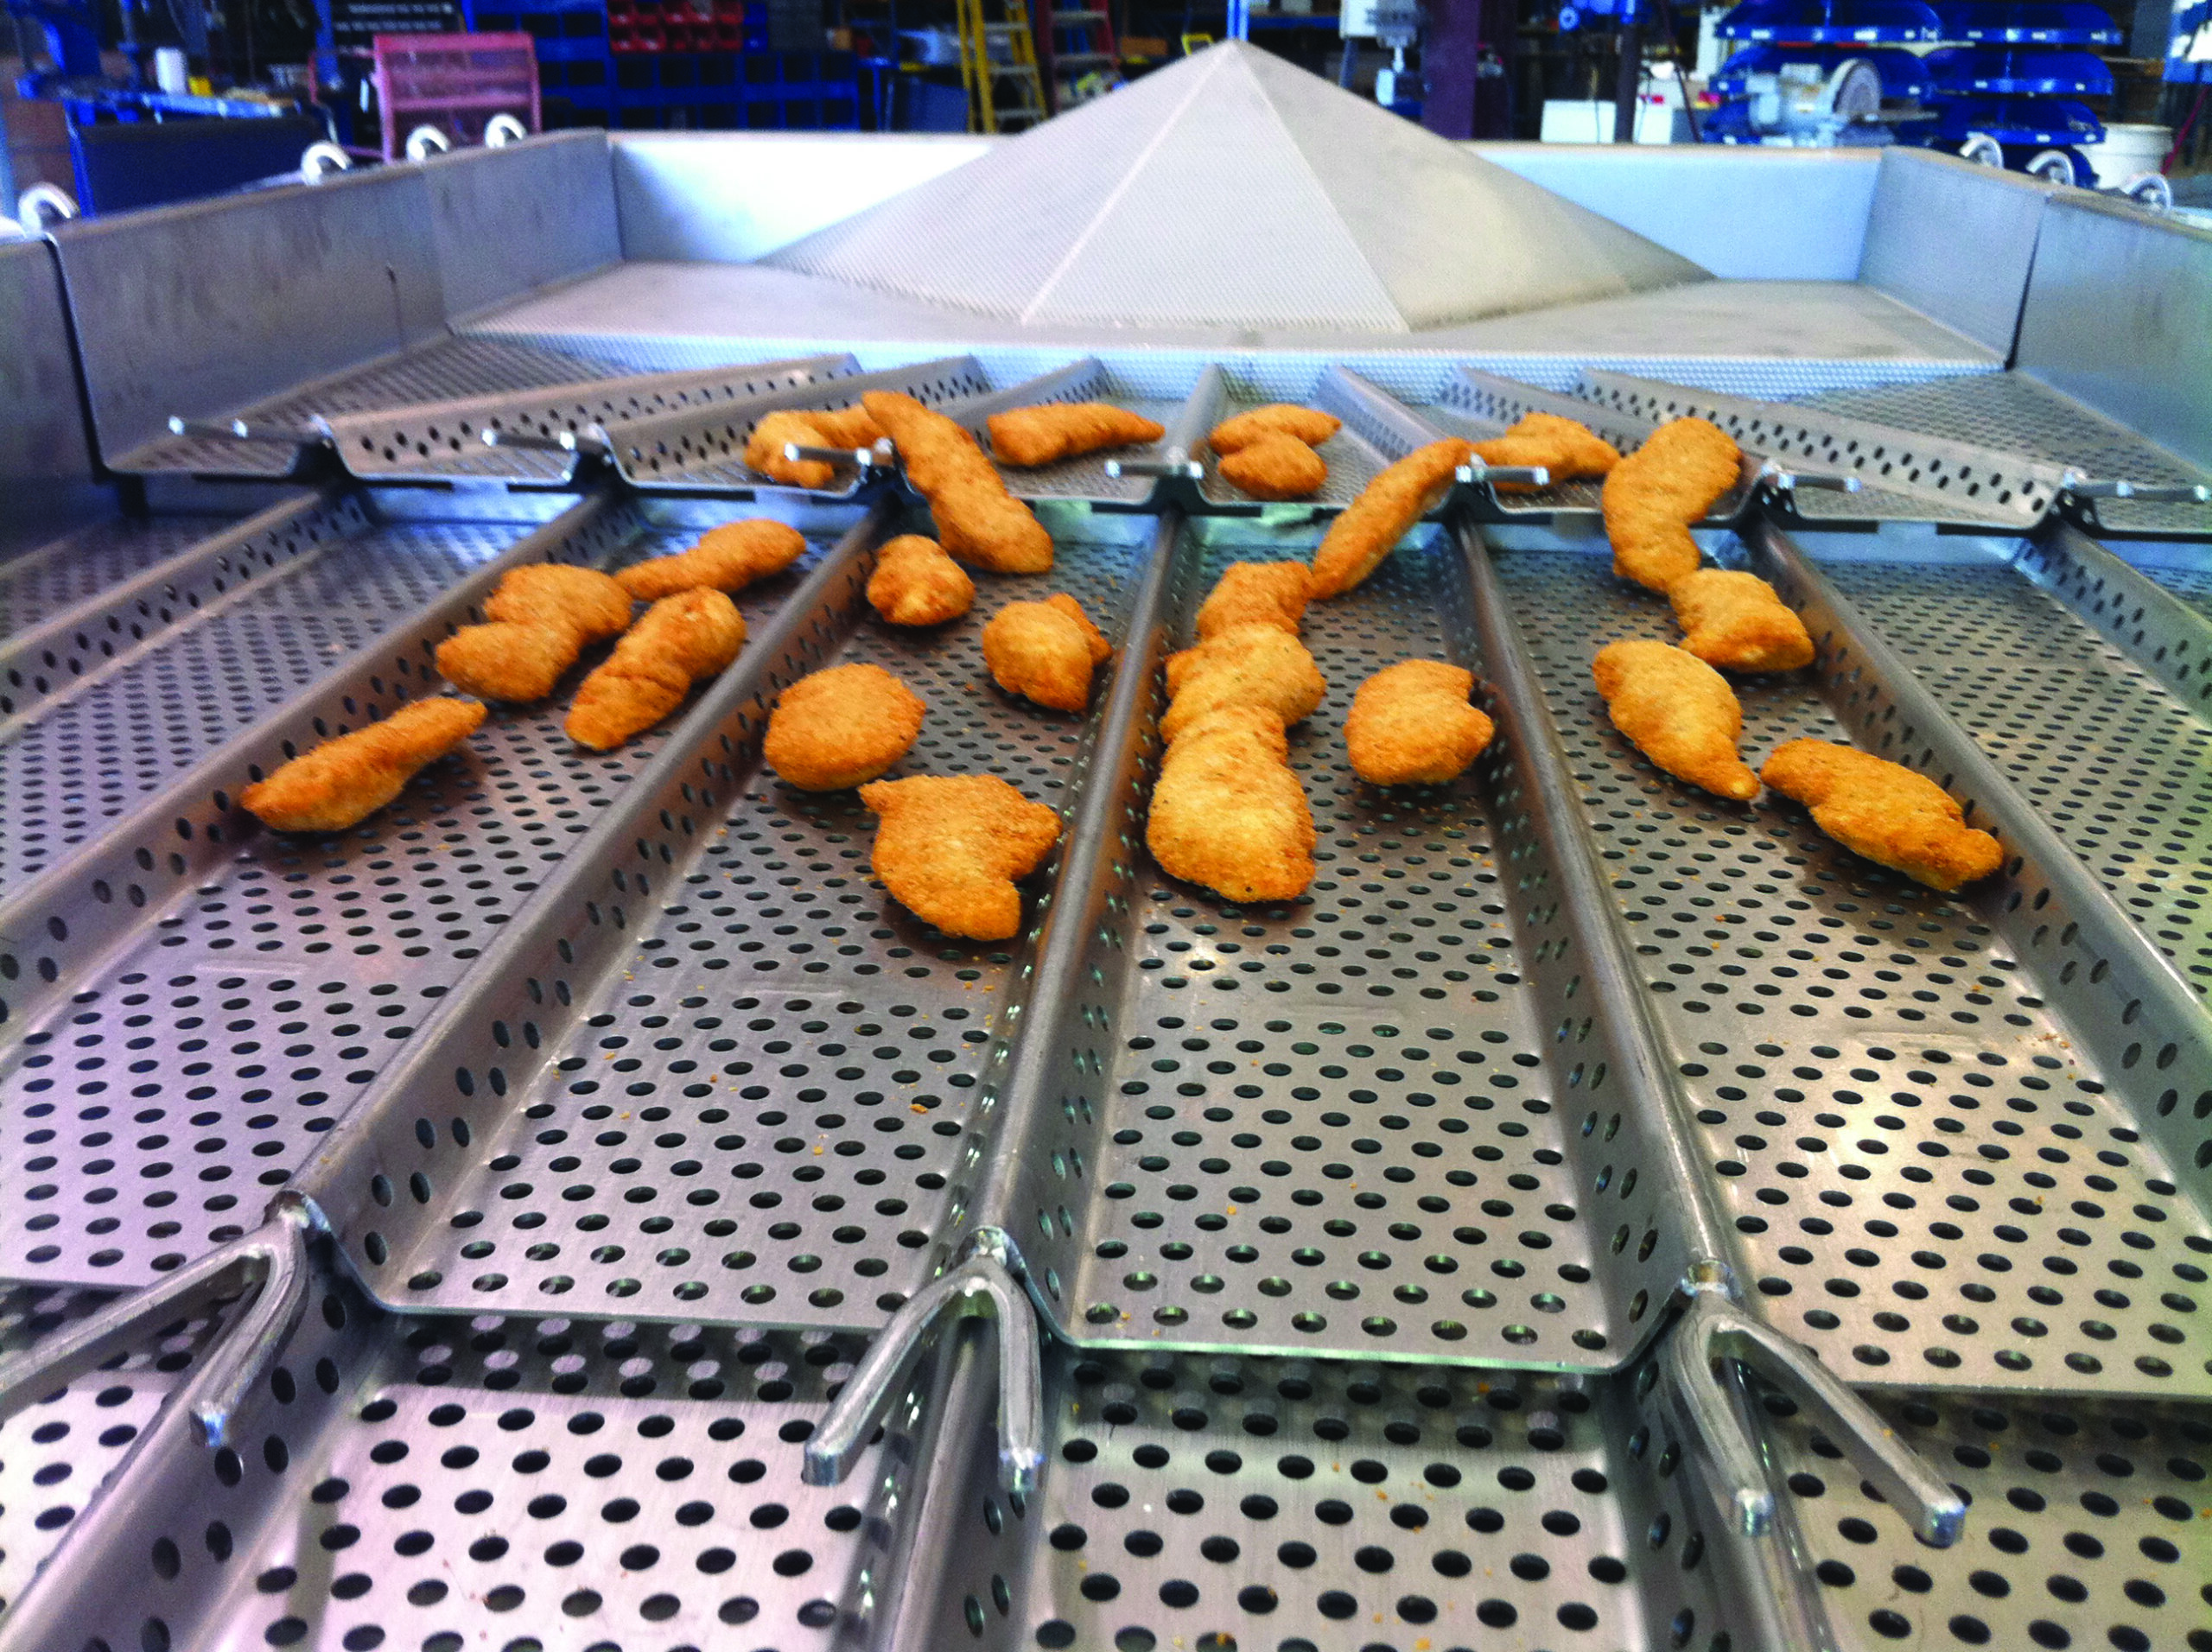 A PFI laning vibratory conveyor moving processed chicken nuggets.